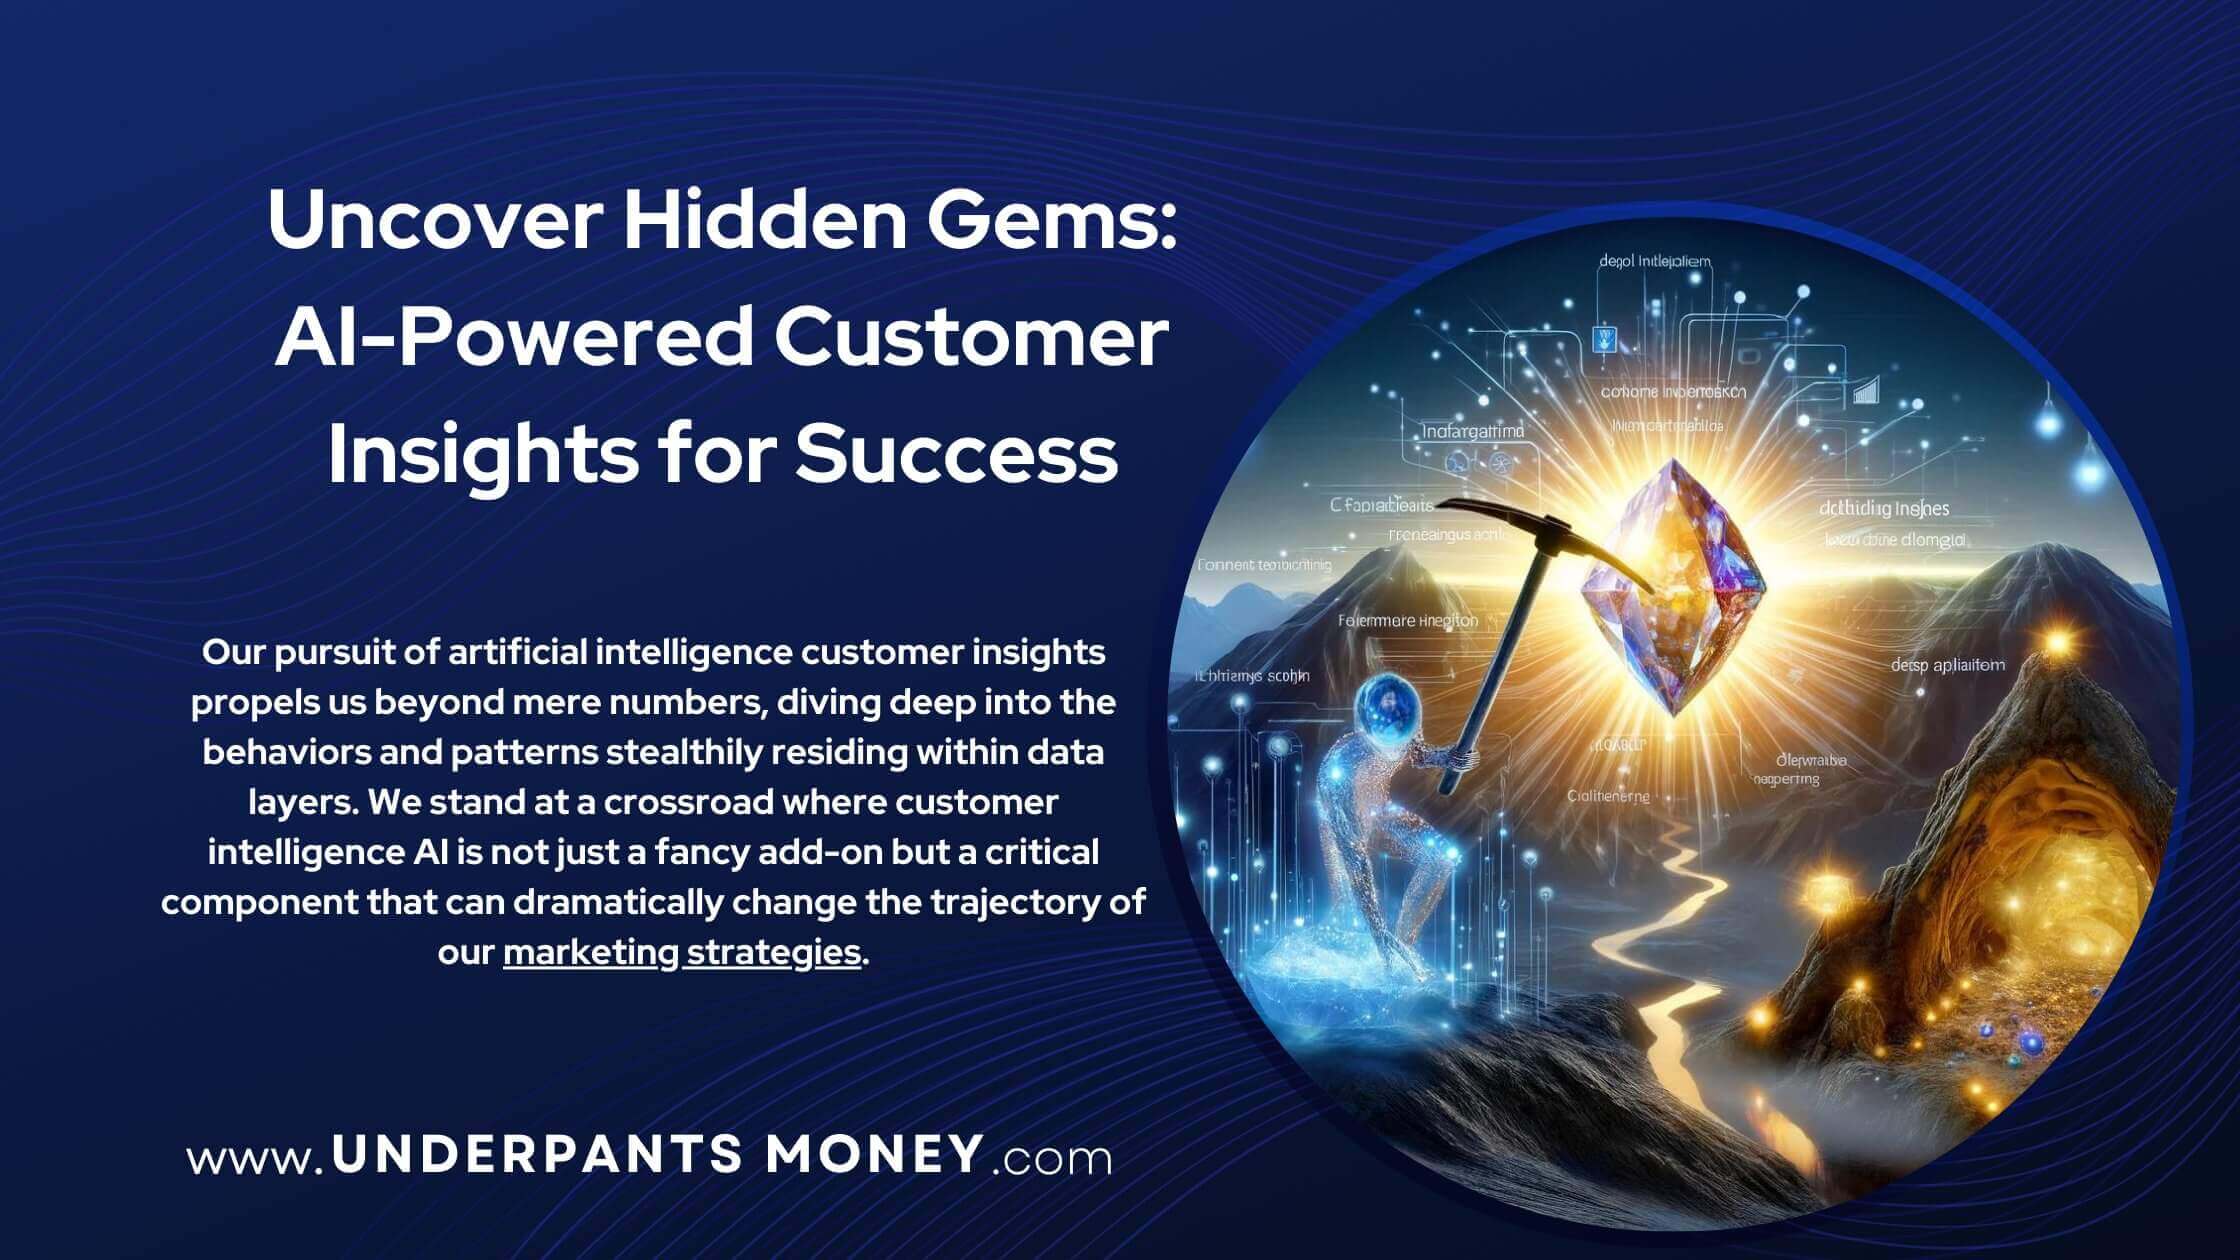 Ai powered customer insights title and description with image of ai mining hidden gems